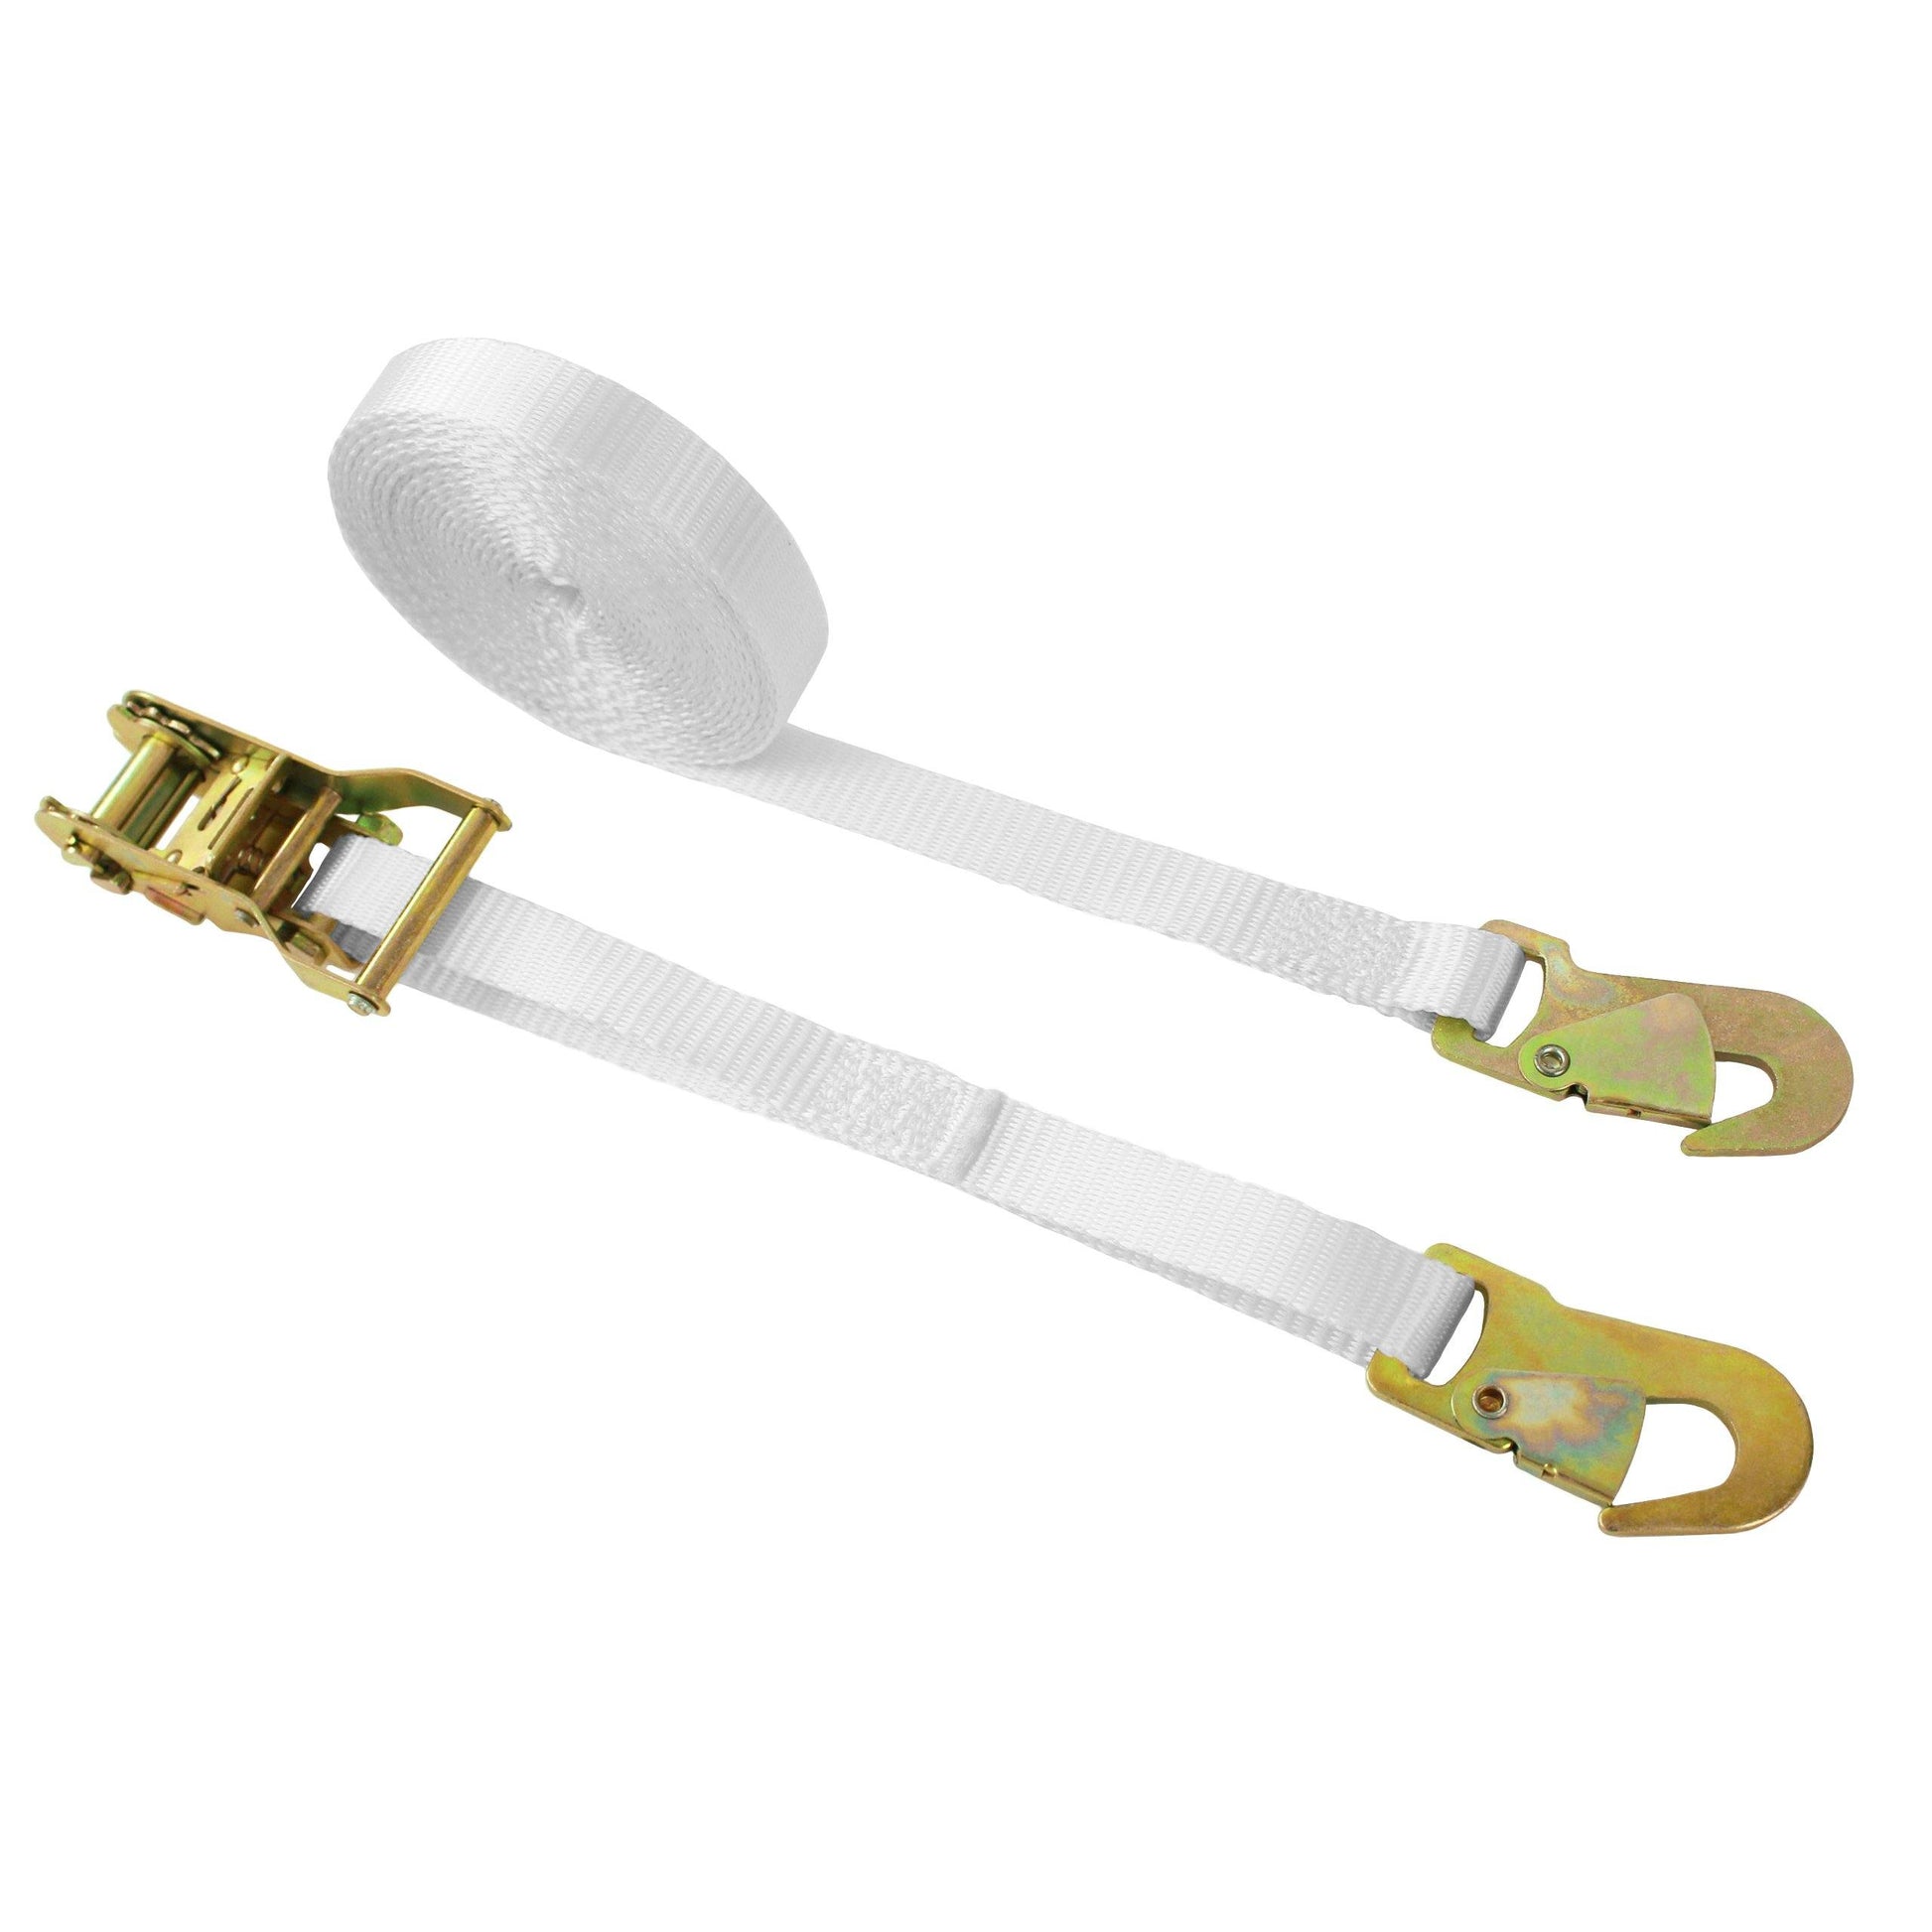 1 Inch Ratchet Tie Down with Snap Hooks - Boxer Tools